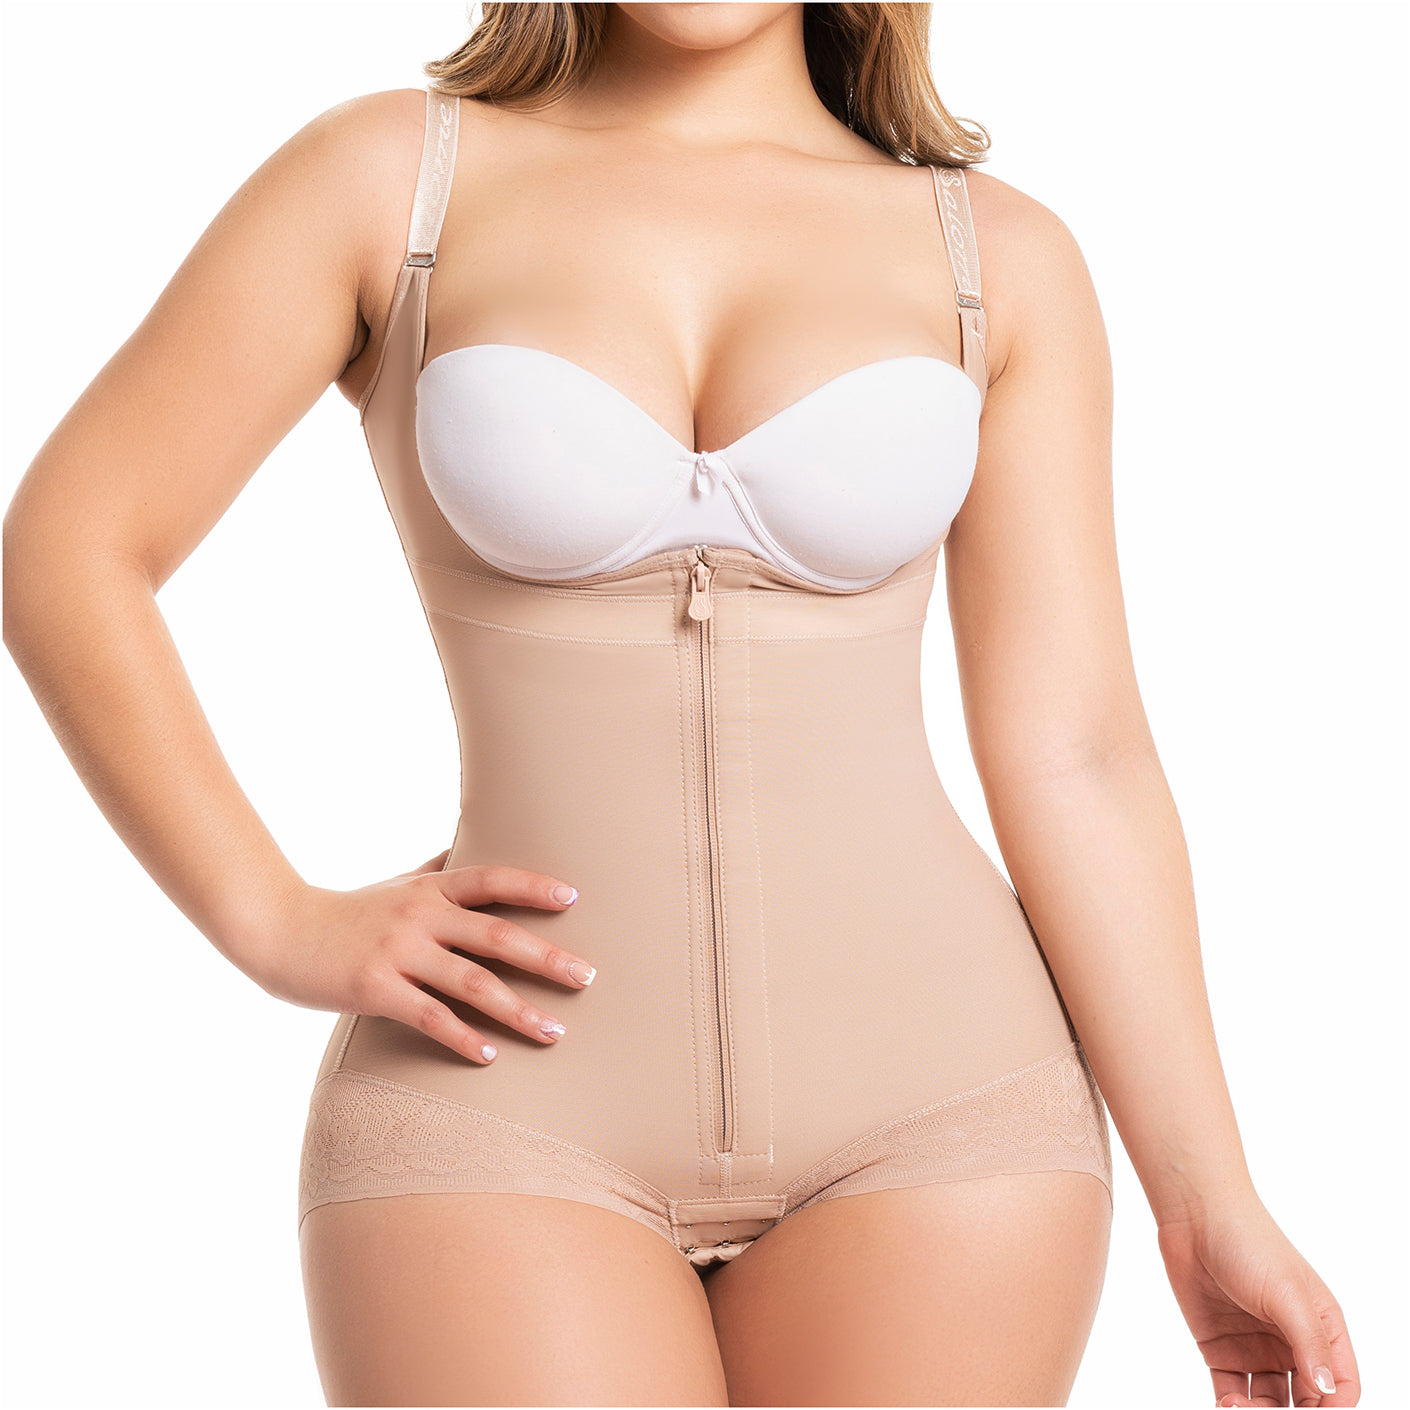 Underwear Shapewear Fajas Colombianas-Girdle for women Back Support  Improves Posture Post Surgical 3-level adjustable front h Beige at   Women's Clothing store